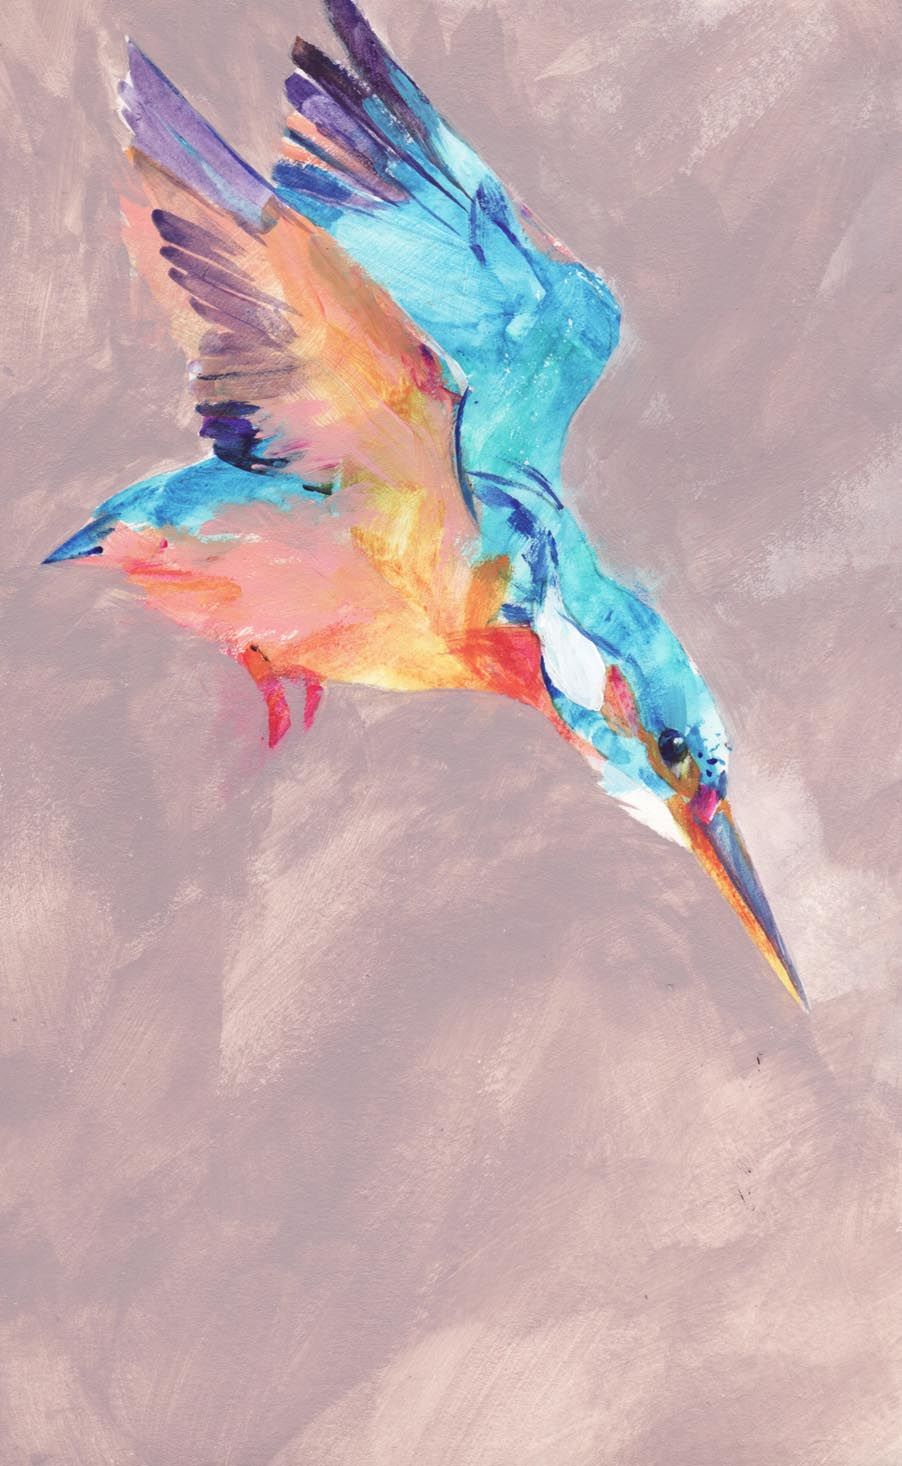 Kingfisher Dive by carolyn carter